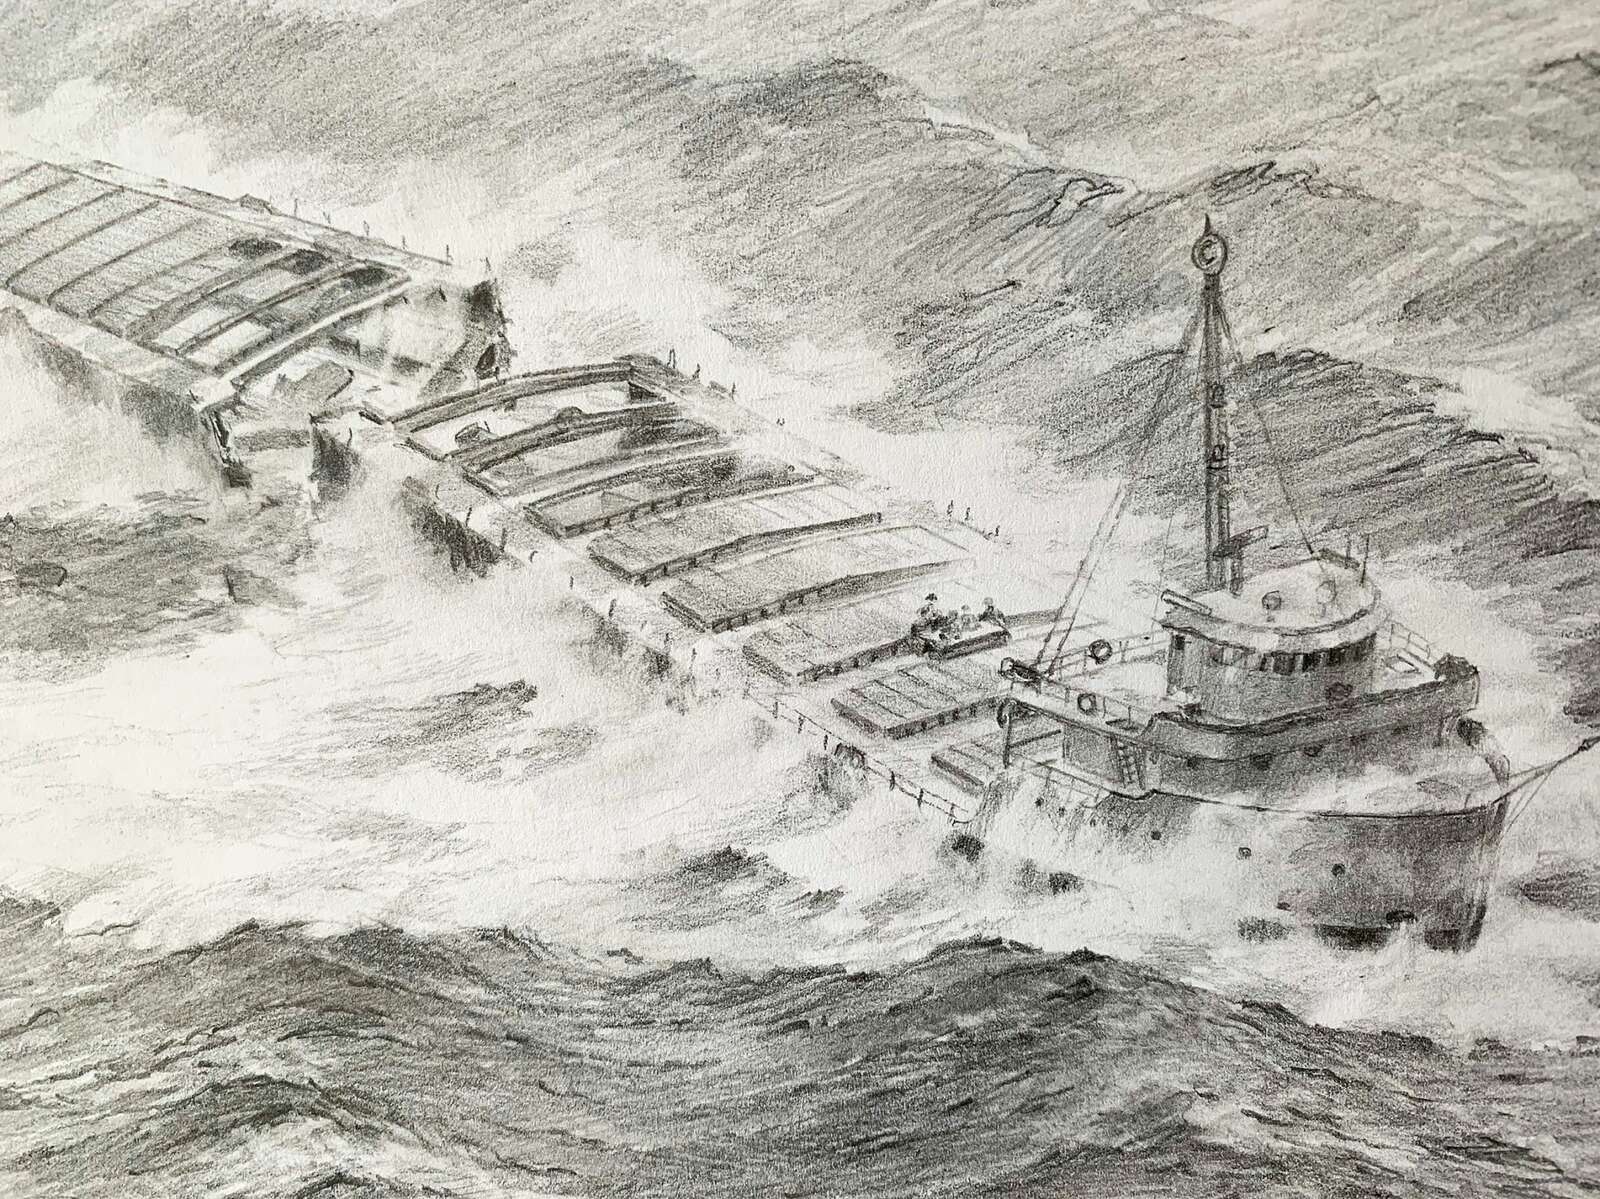 Sinking of the Daniel J. Morrell a tale of death, survival
